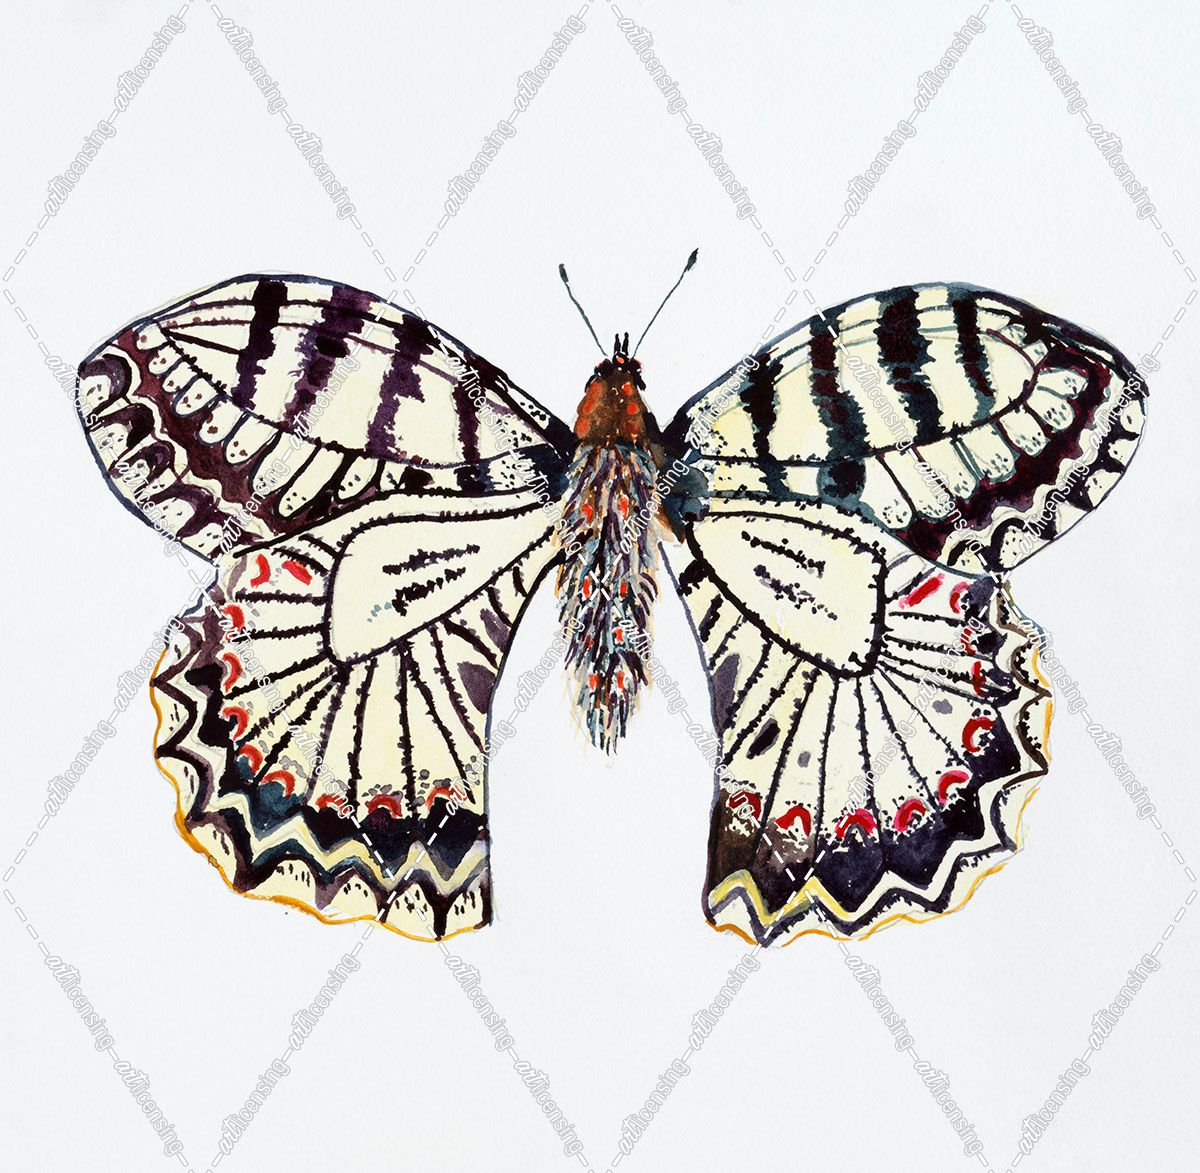 C-Butterfly Collection Southern Festoon